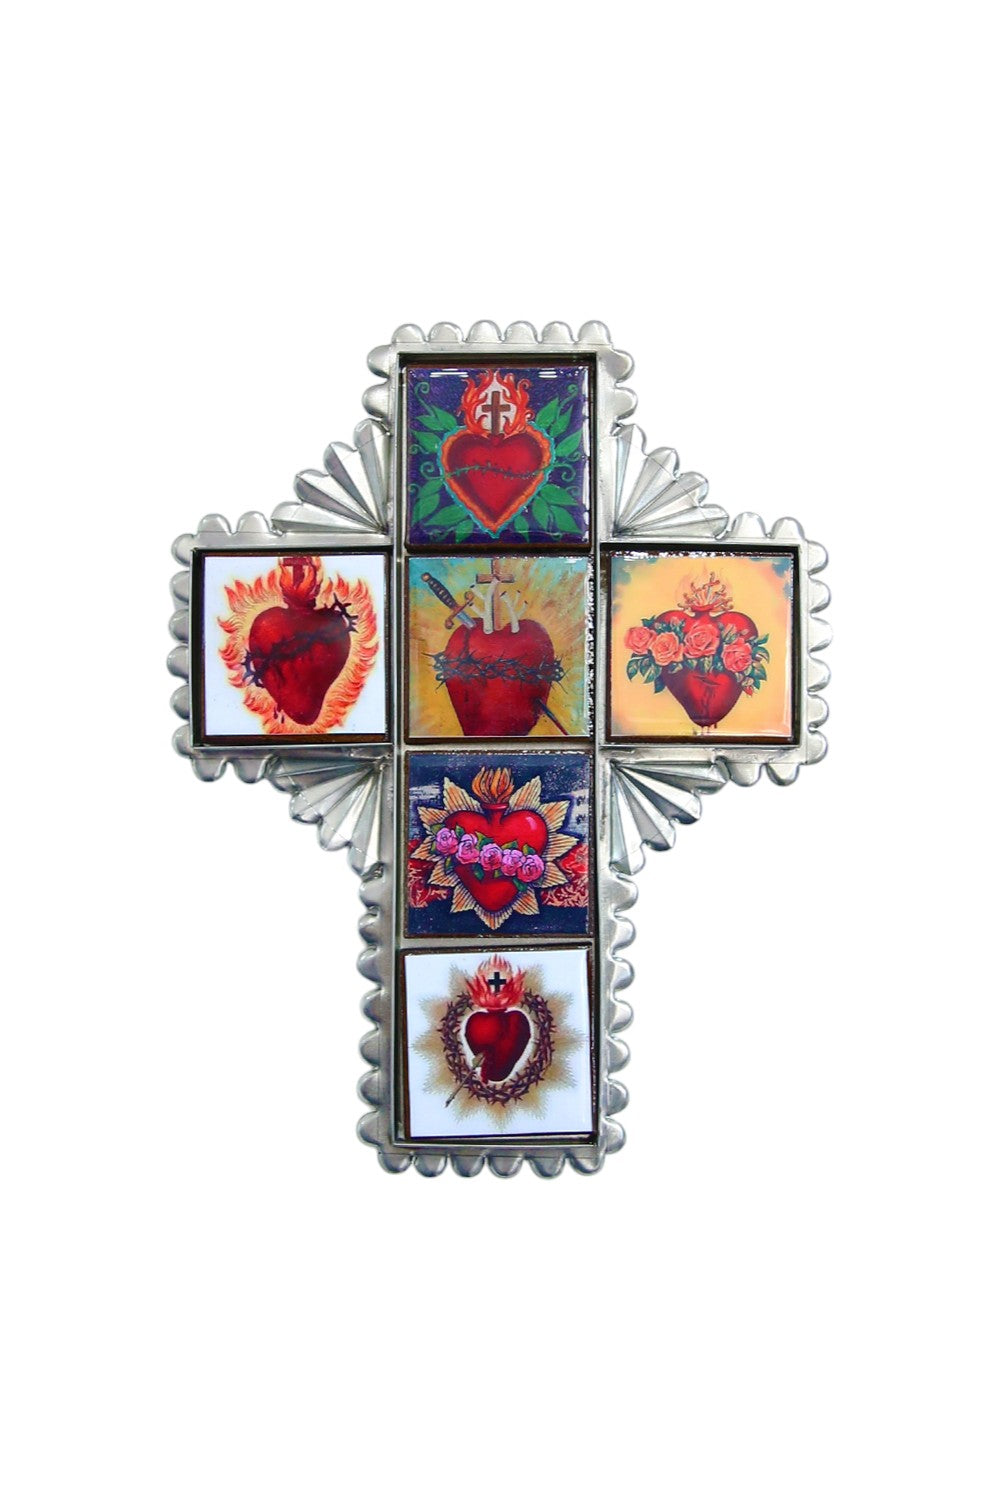 MEXICAN SACRED HEARTS CROSS WITH TILES